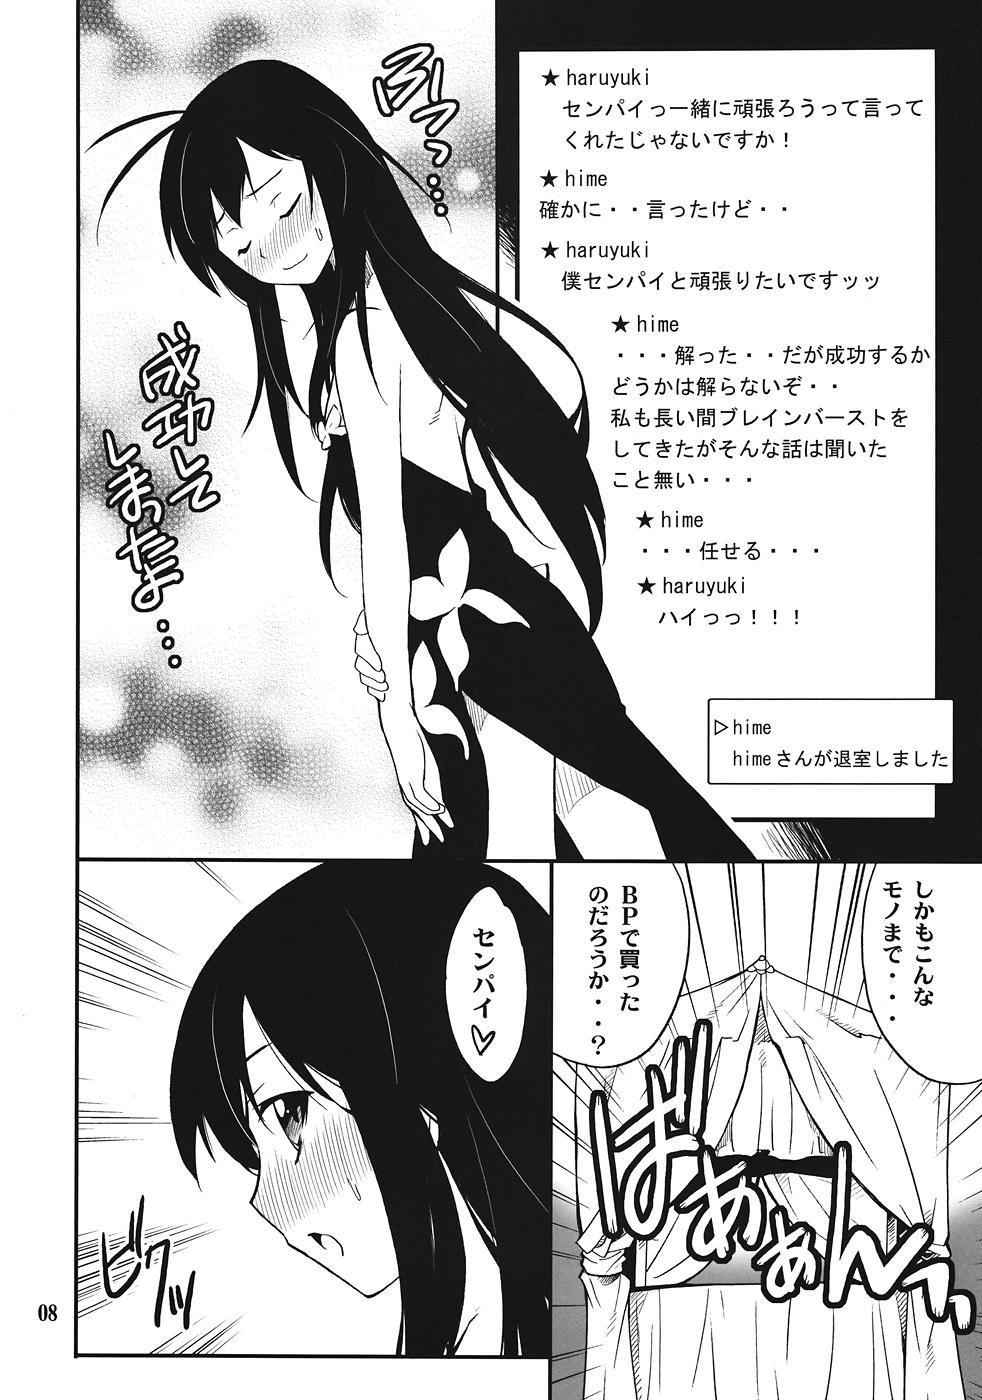 Gay Friend Another World - Accel world Worship - Page 7